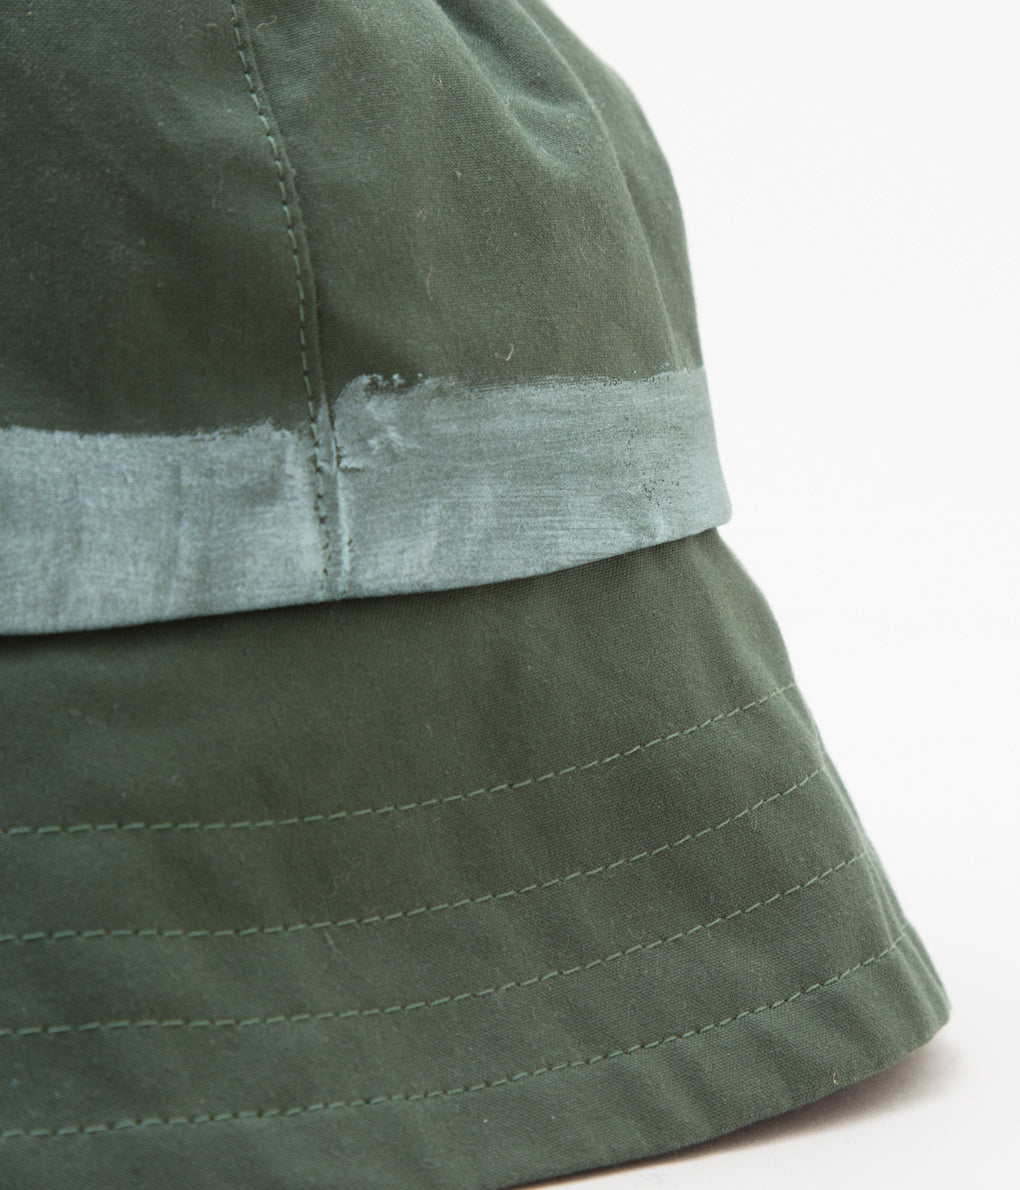 STUDIO KETTLE "DECK DRY WAX COTTON"(FOREST W/ VIRIDIAN PAINTED BAND)